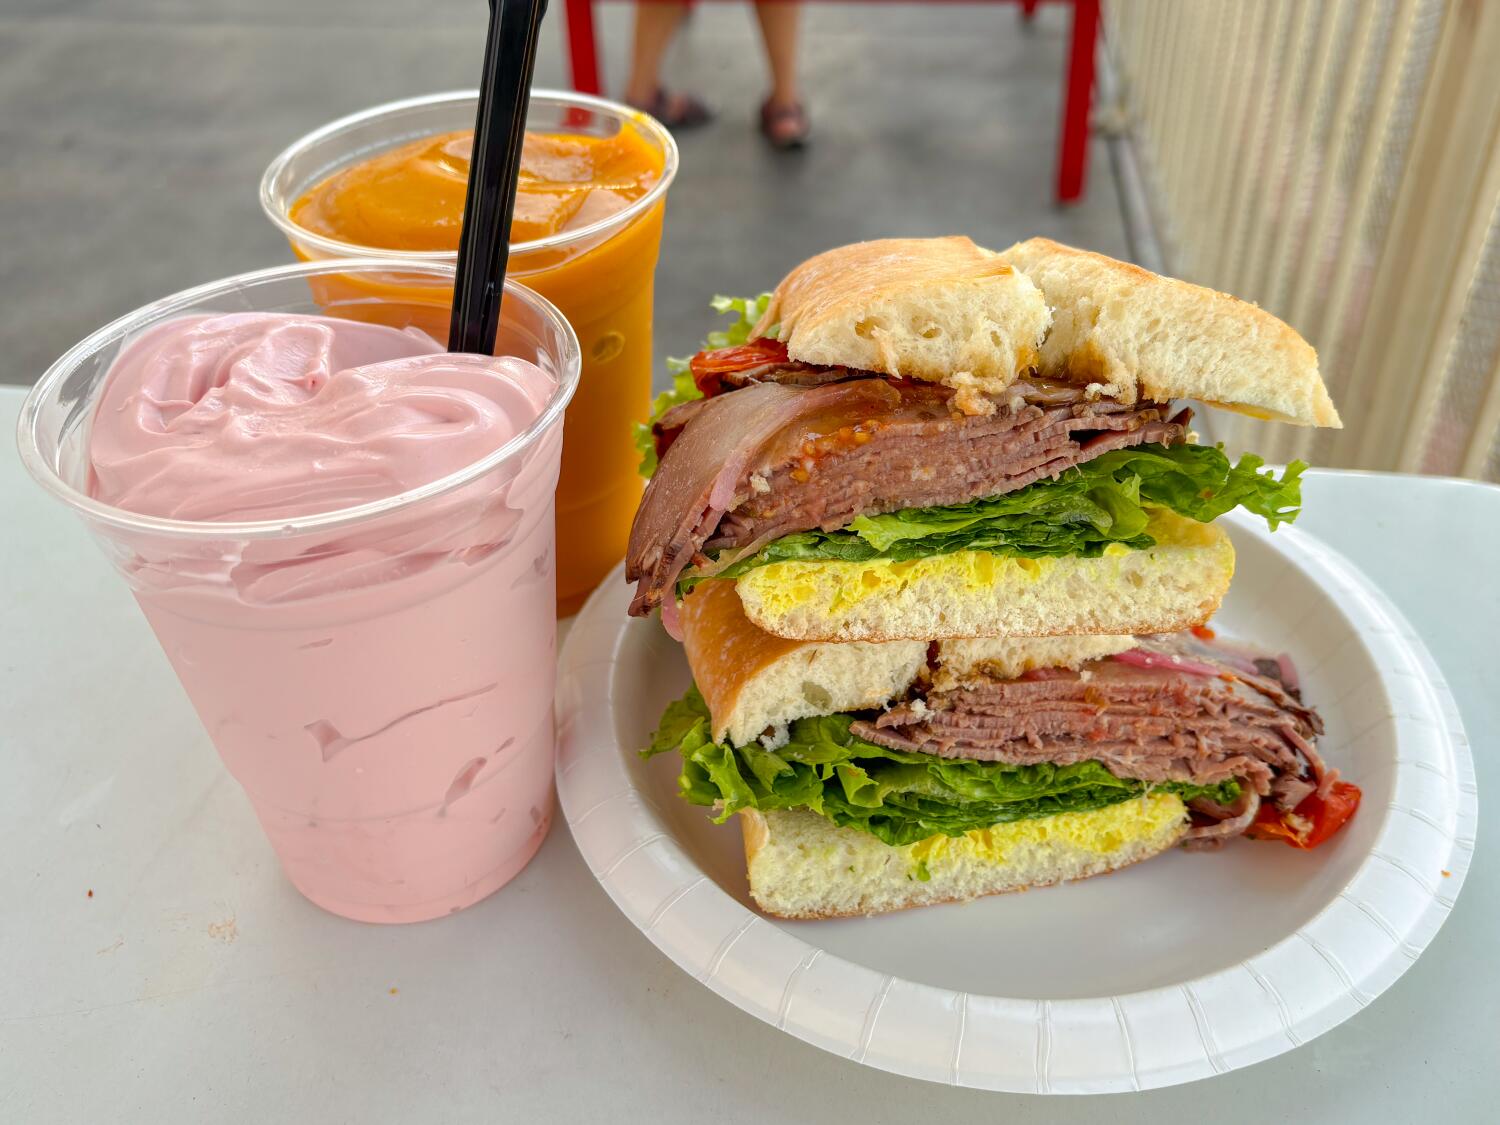 A critical breakdown of Costco's new food court items